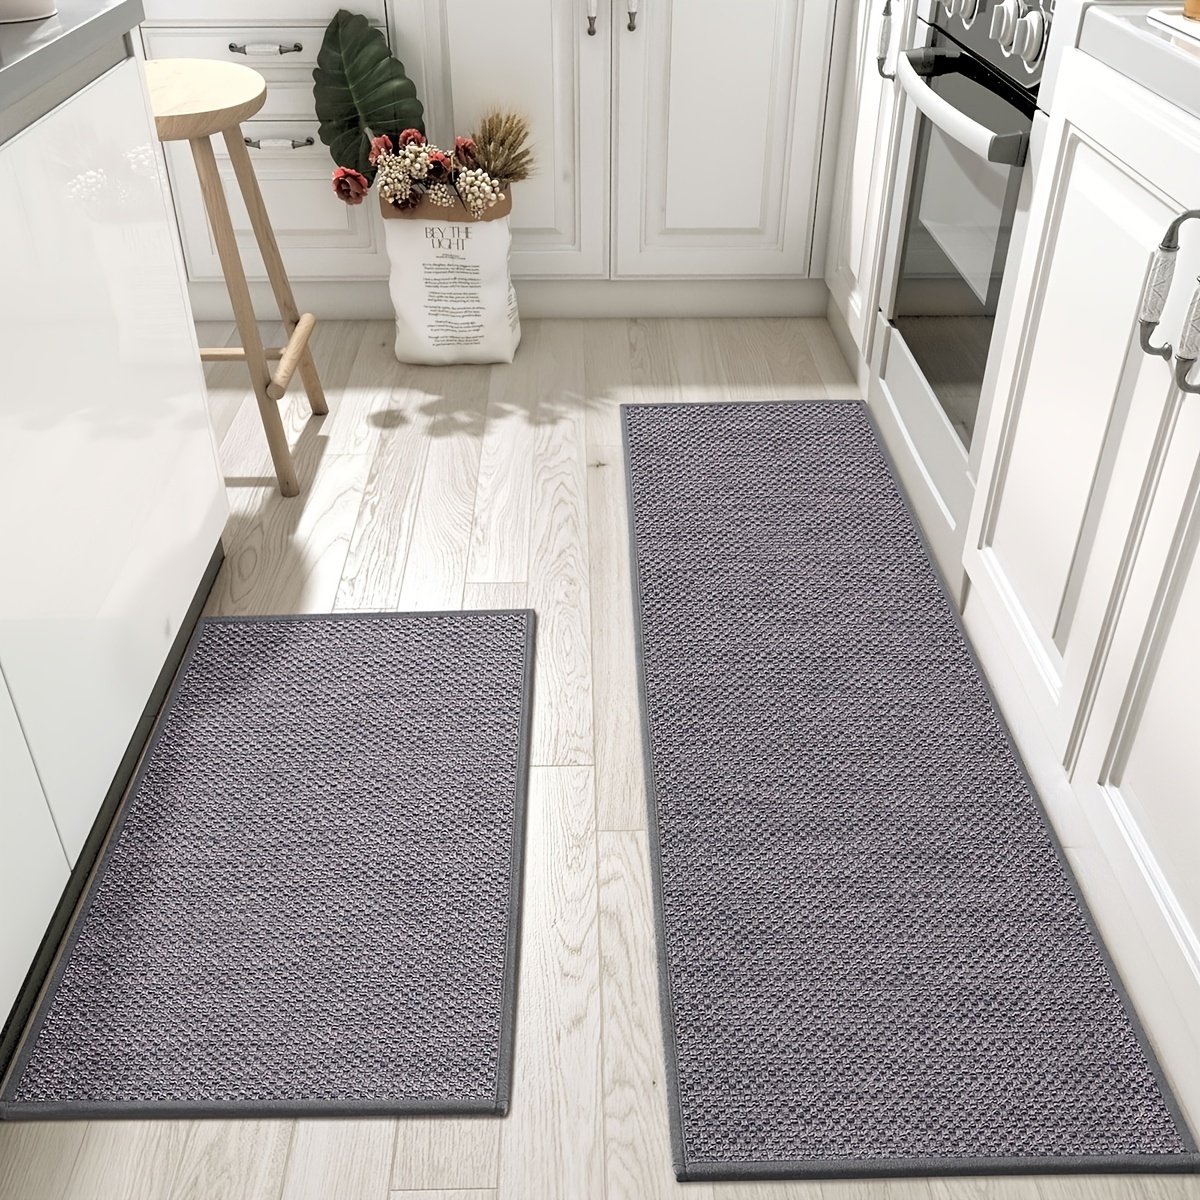 Kitchen Rugs and Mats Washable [2 PCS],Non-Skid Natural Rubber Kitchen Mats  for Floor, Runner Rugs Set for Kitchen Floor,Front of Sink, Hallway